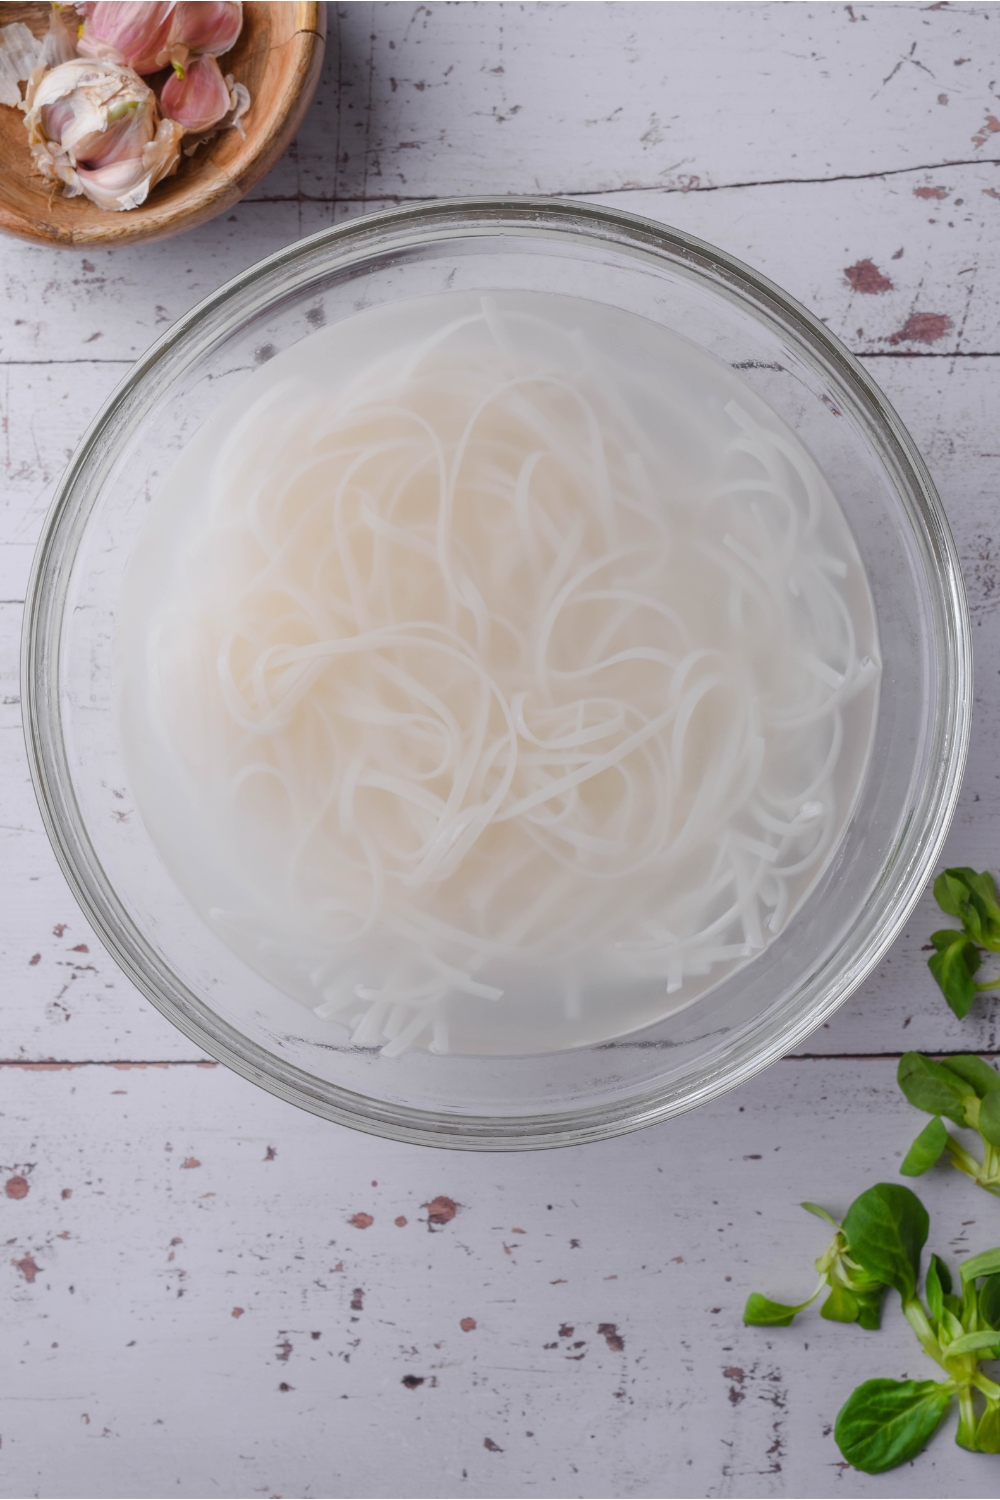 A bowl of rice noodles soaking in water.